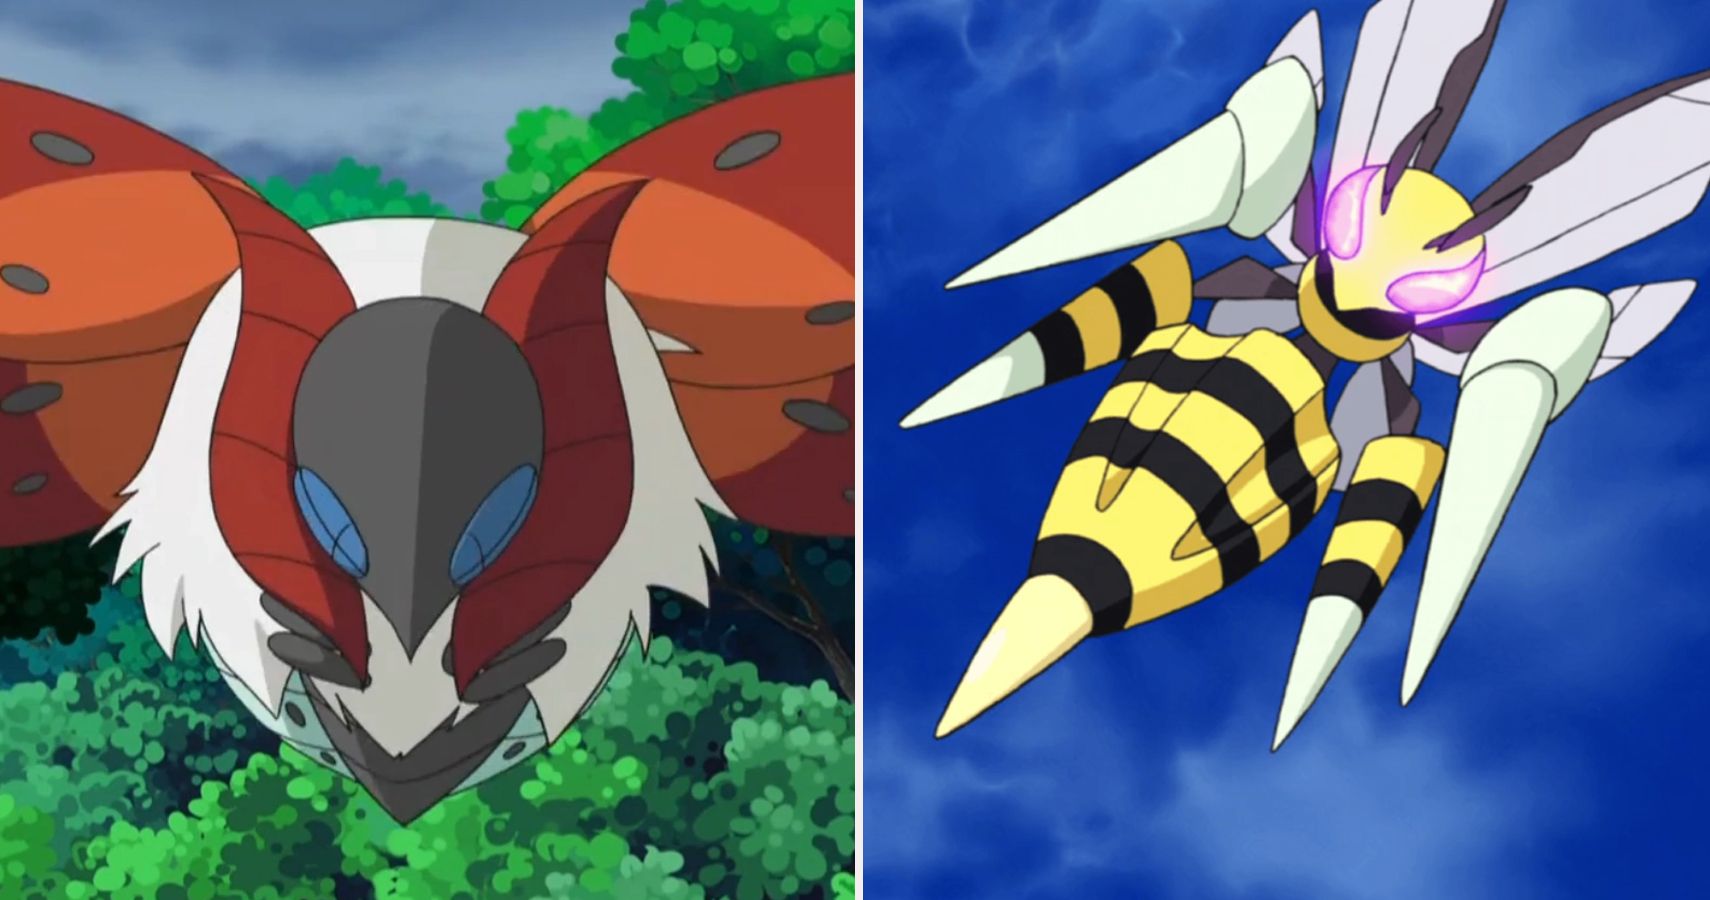 Which Pokemon is best against the Bug-Type Pokemon that the First